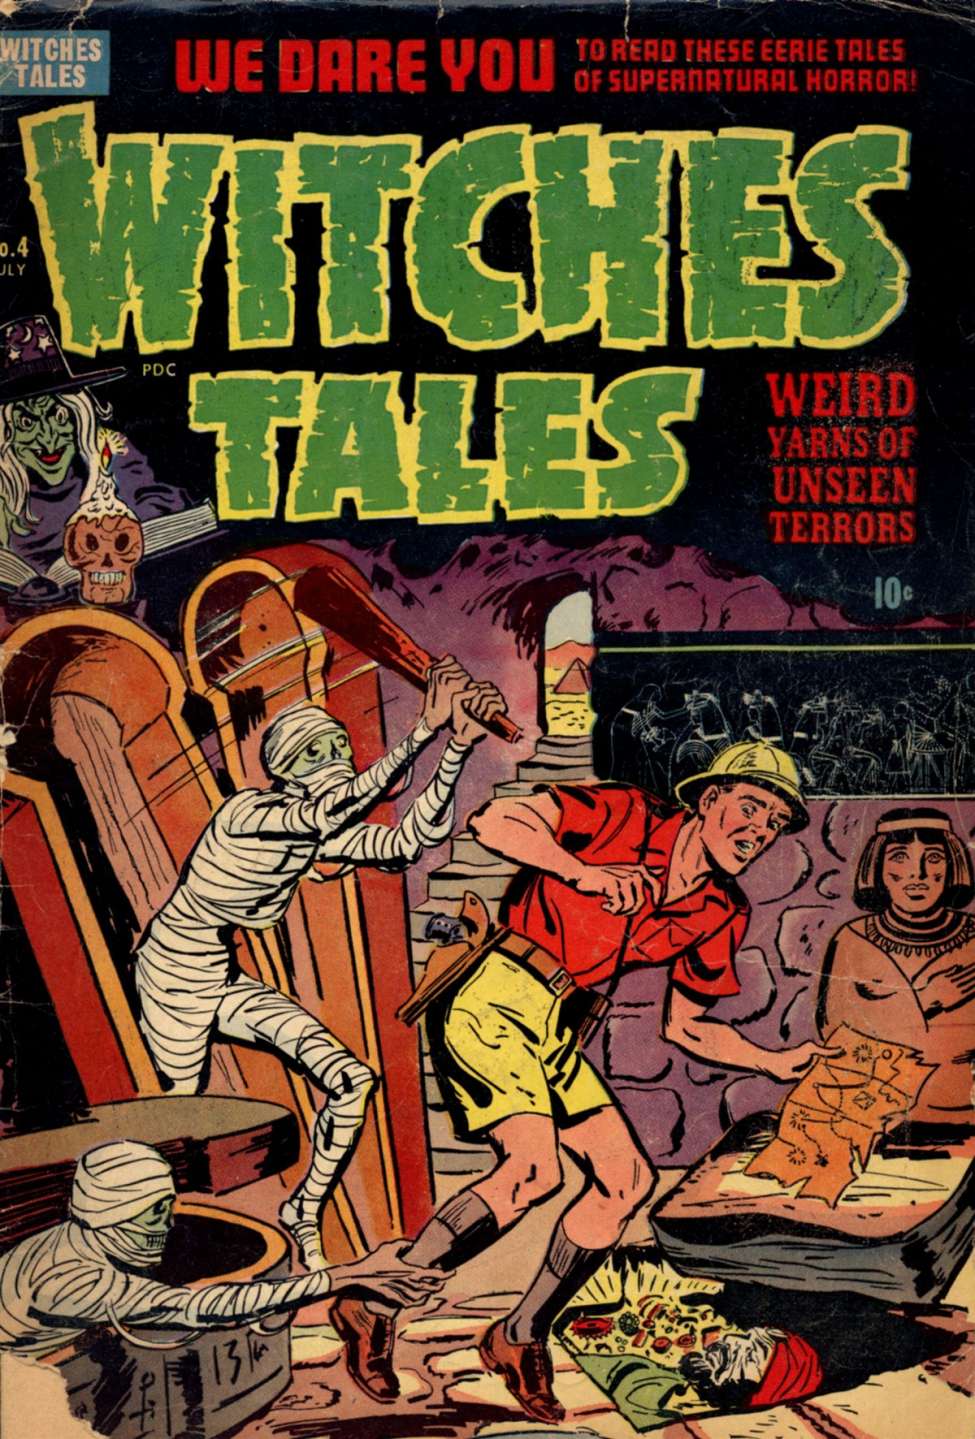 Comic Book Cover For Witches Tales 4